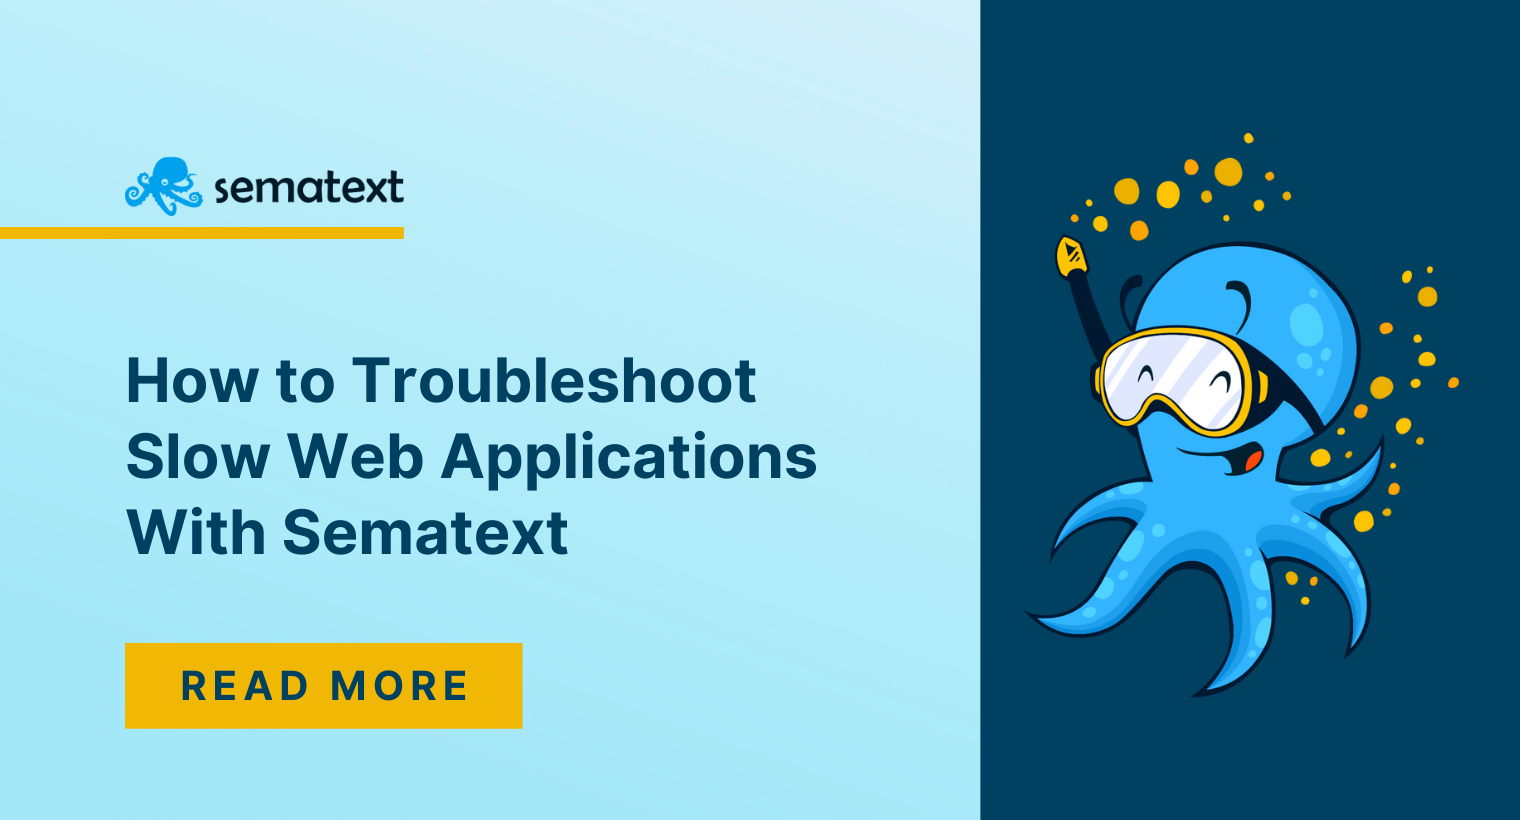 How to Troubleshoot Slow Web Applications With Sematext